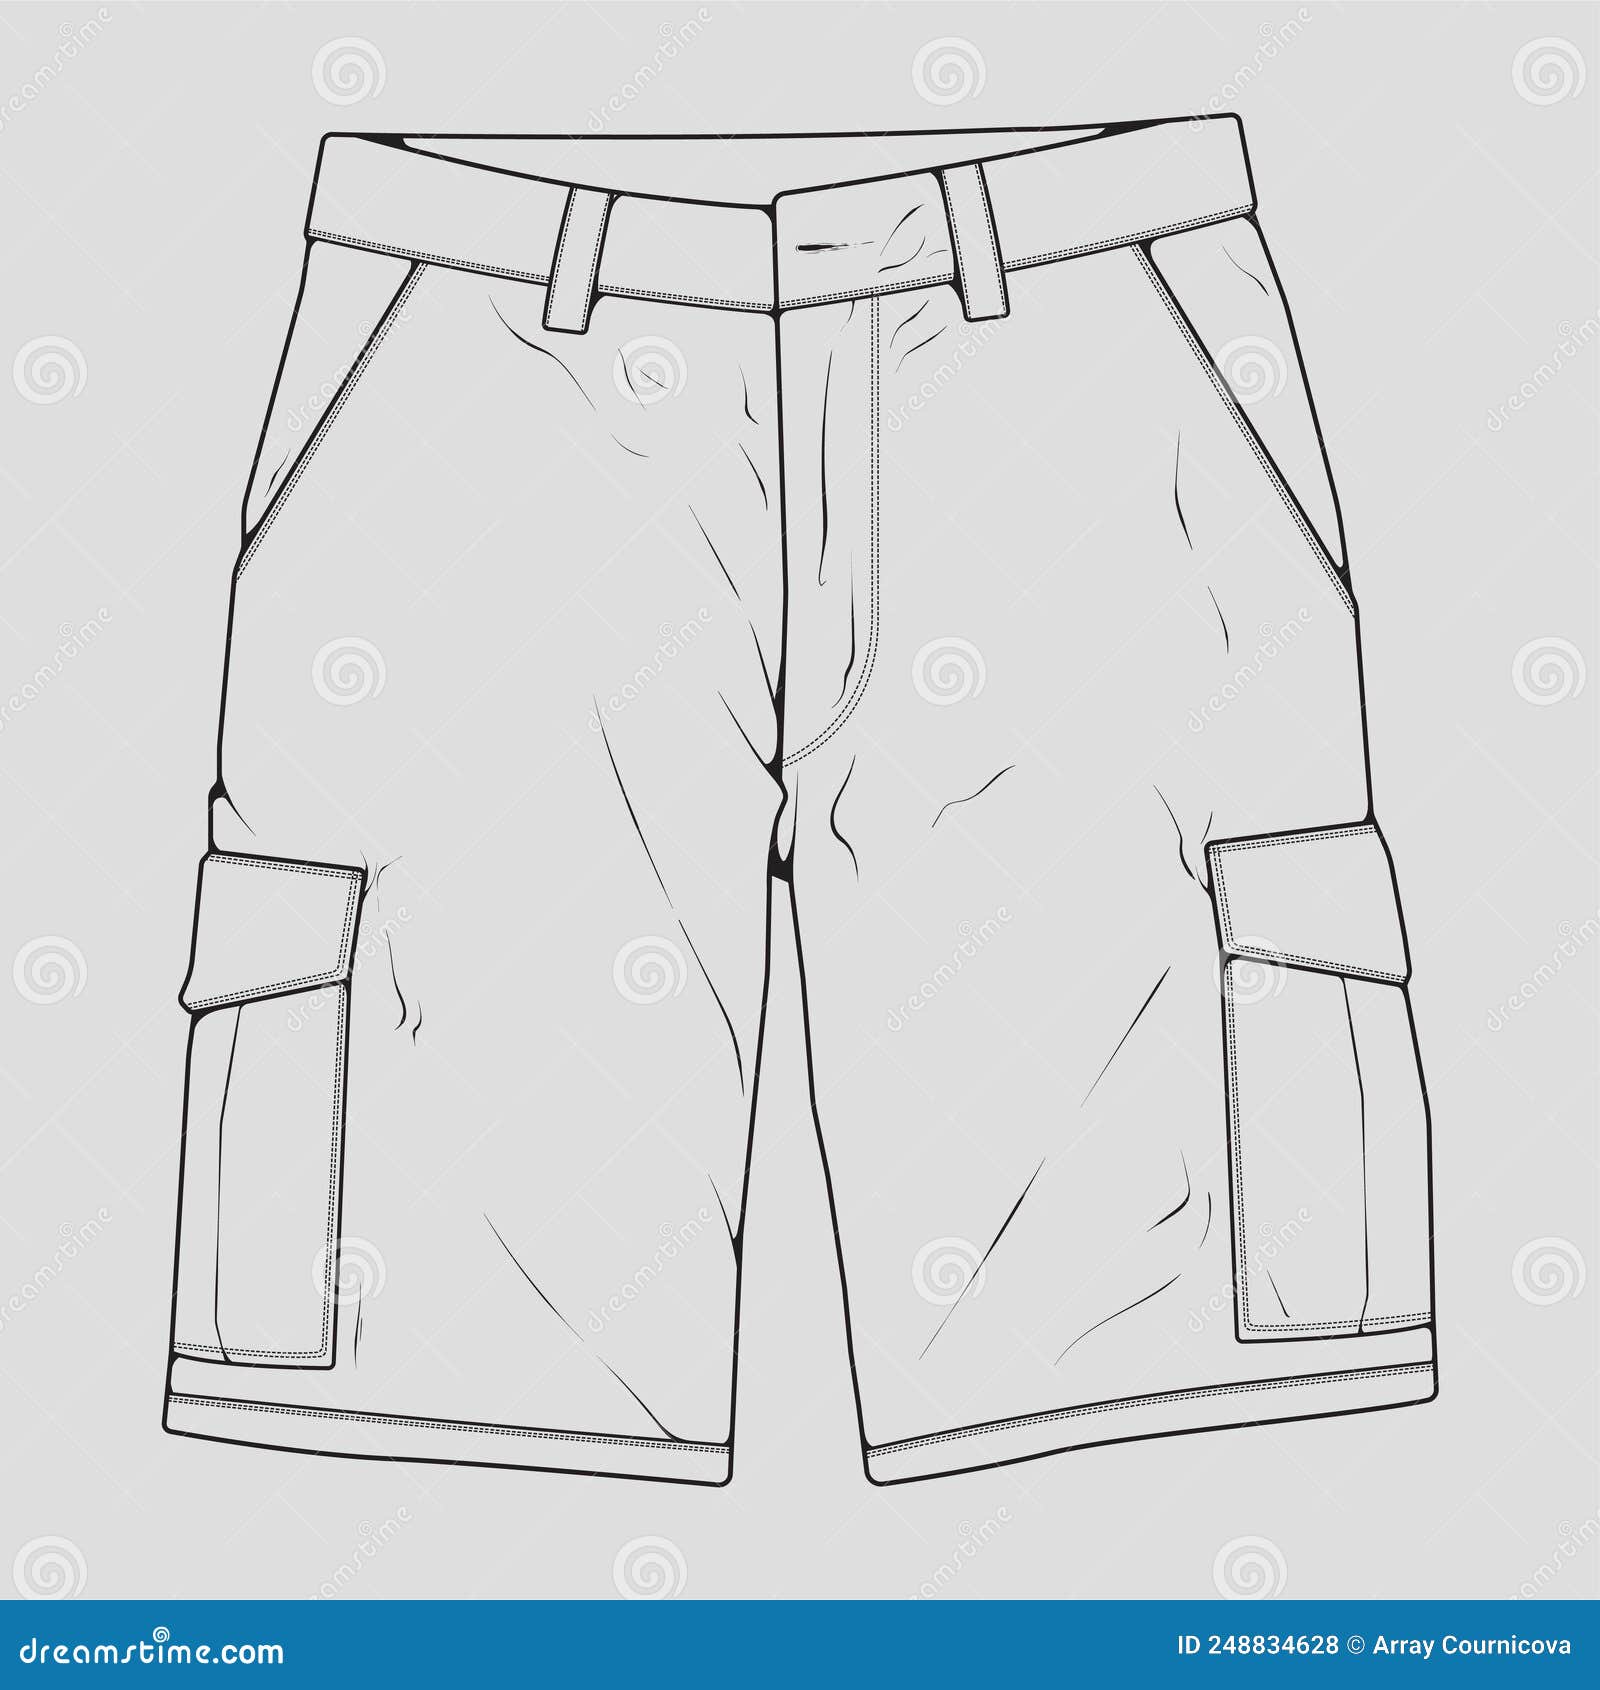 Short Pants Outline Drawing Vector, Short Pants in a Sketch Style ...